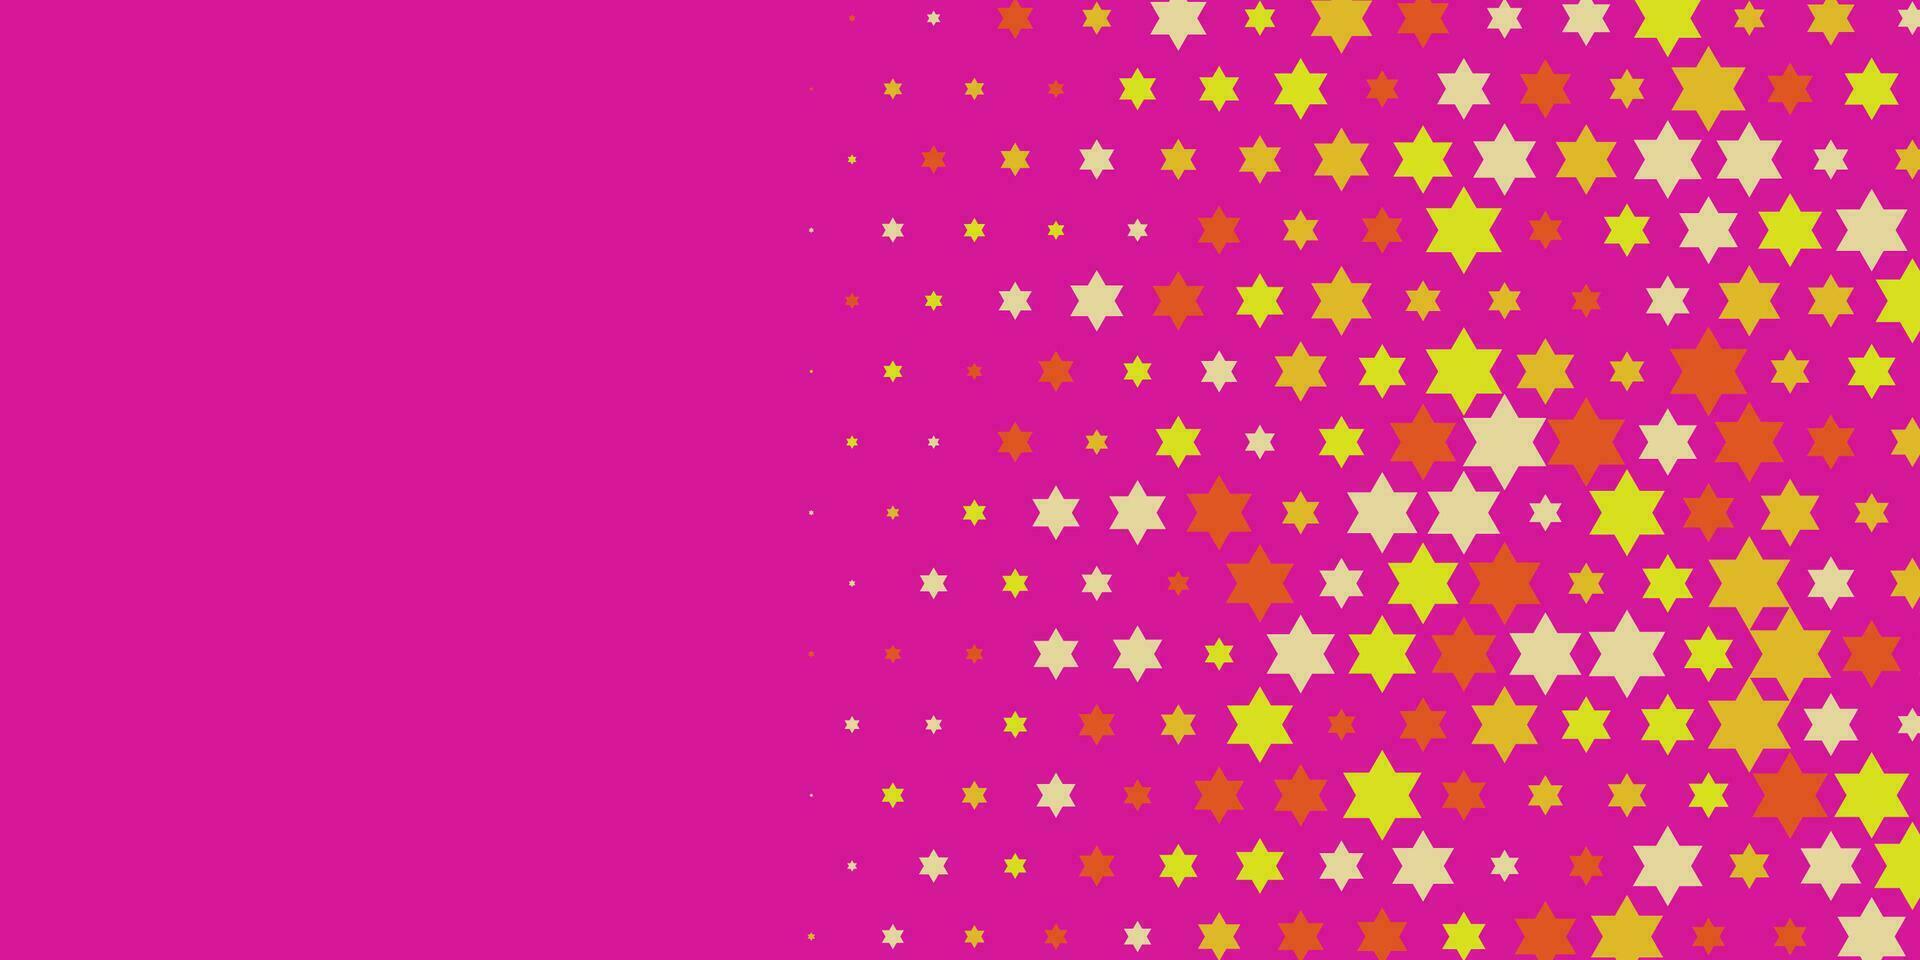 Colorful stars Abstract Illustration background beautiful banner with copy space vector